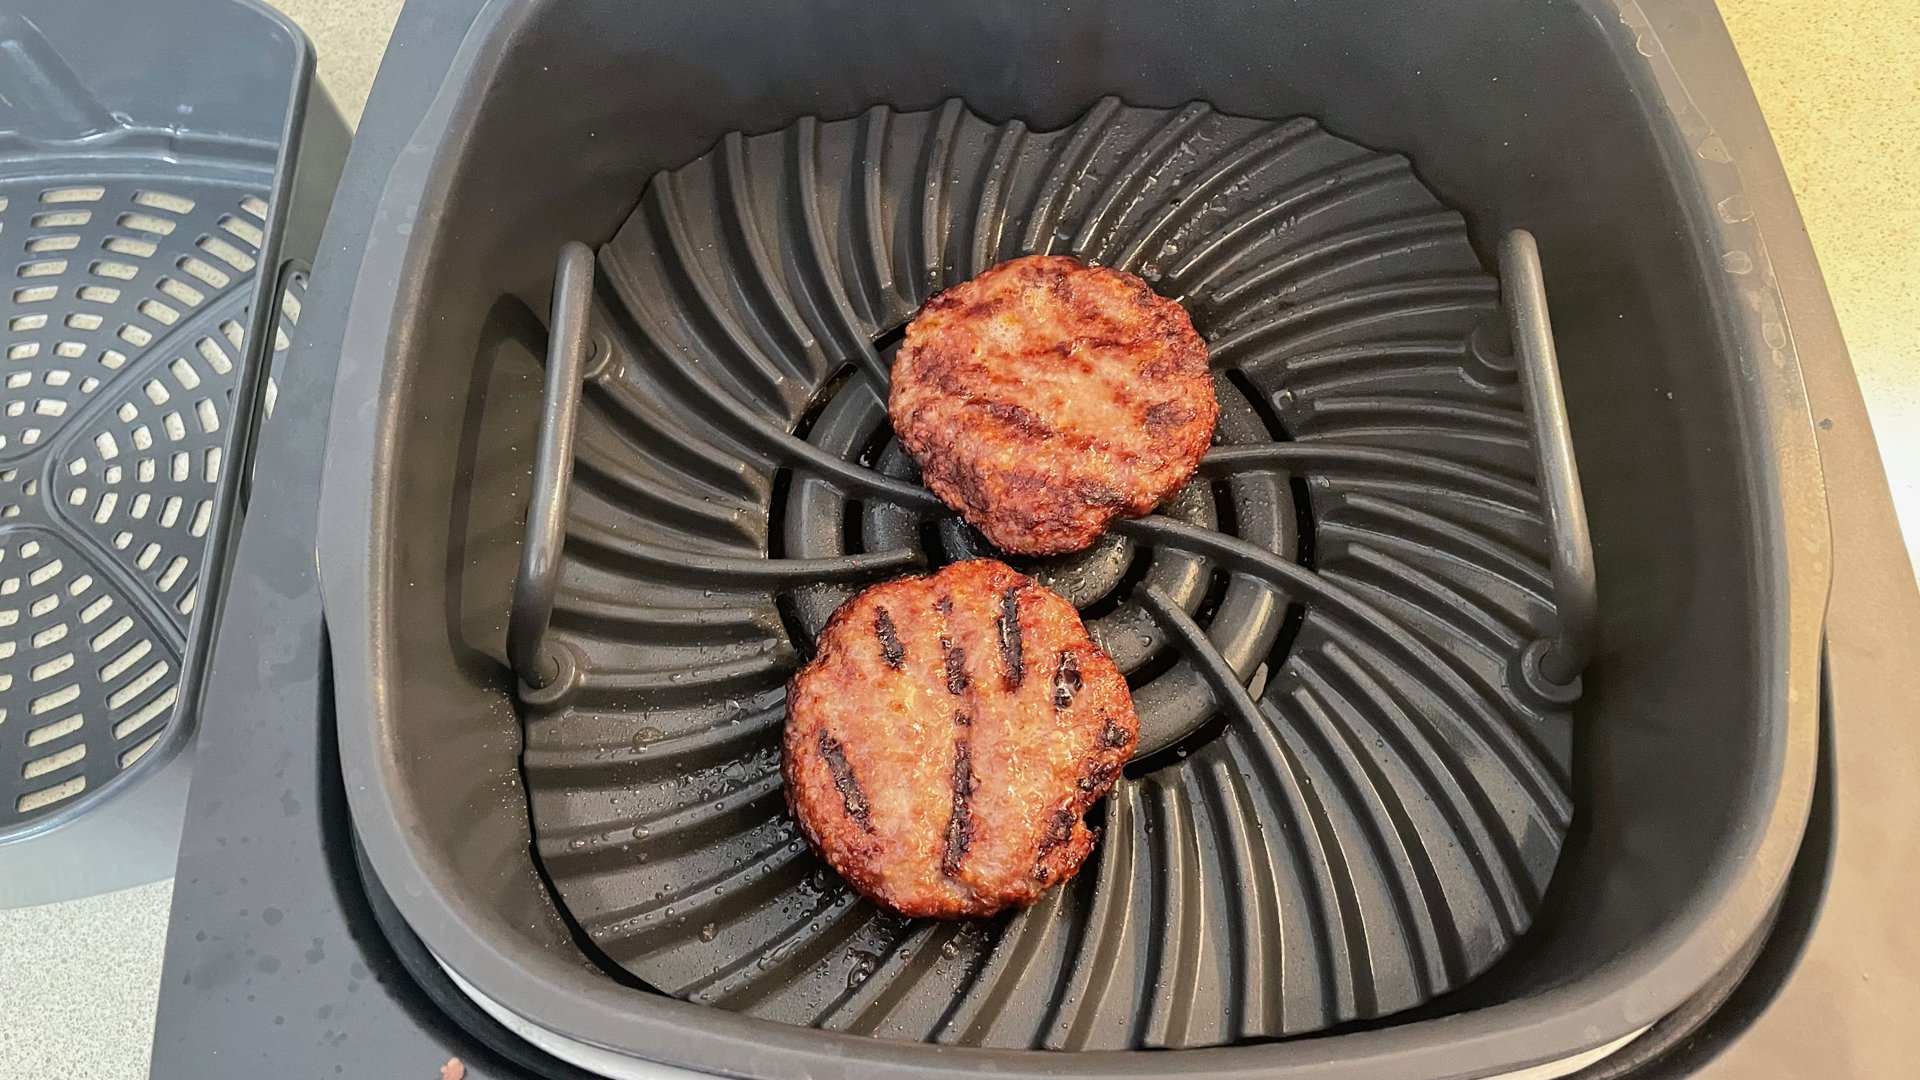 Ninja Foodi Health Grill & Air Fryer with Grilled Burger Inside